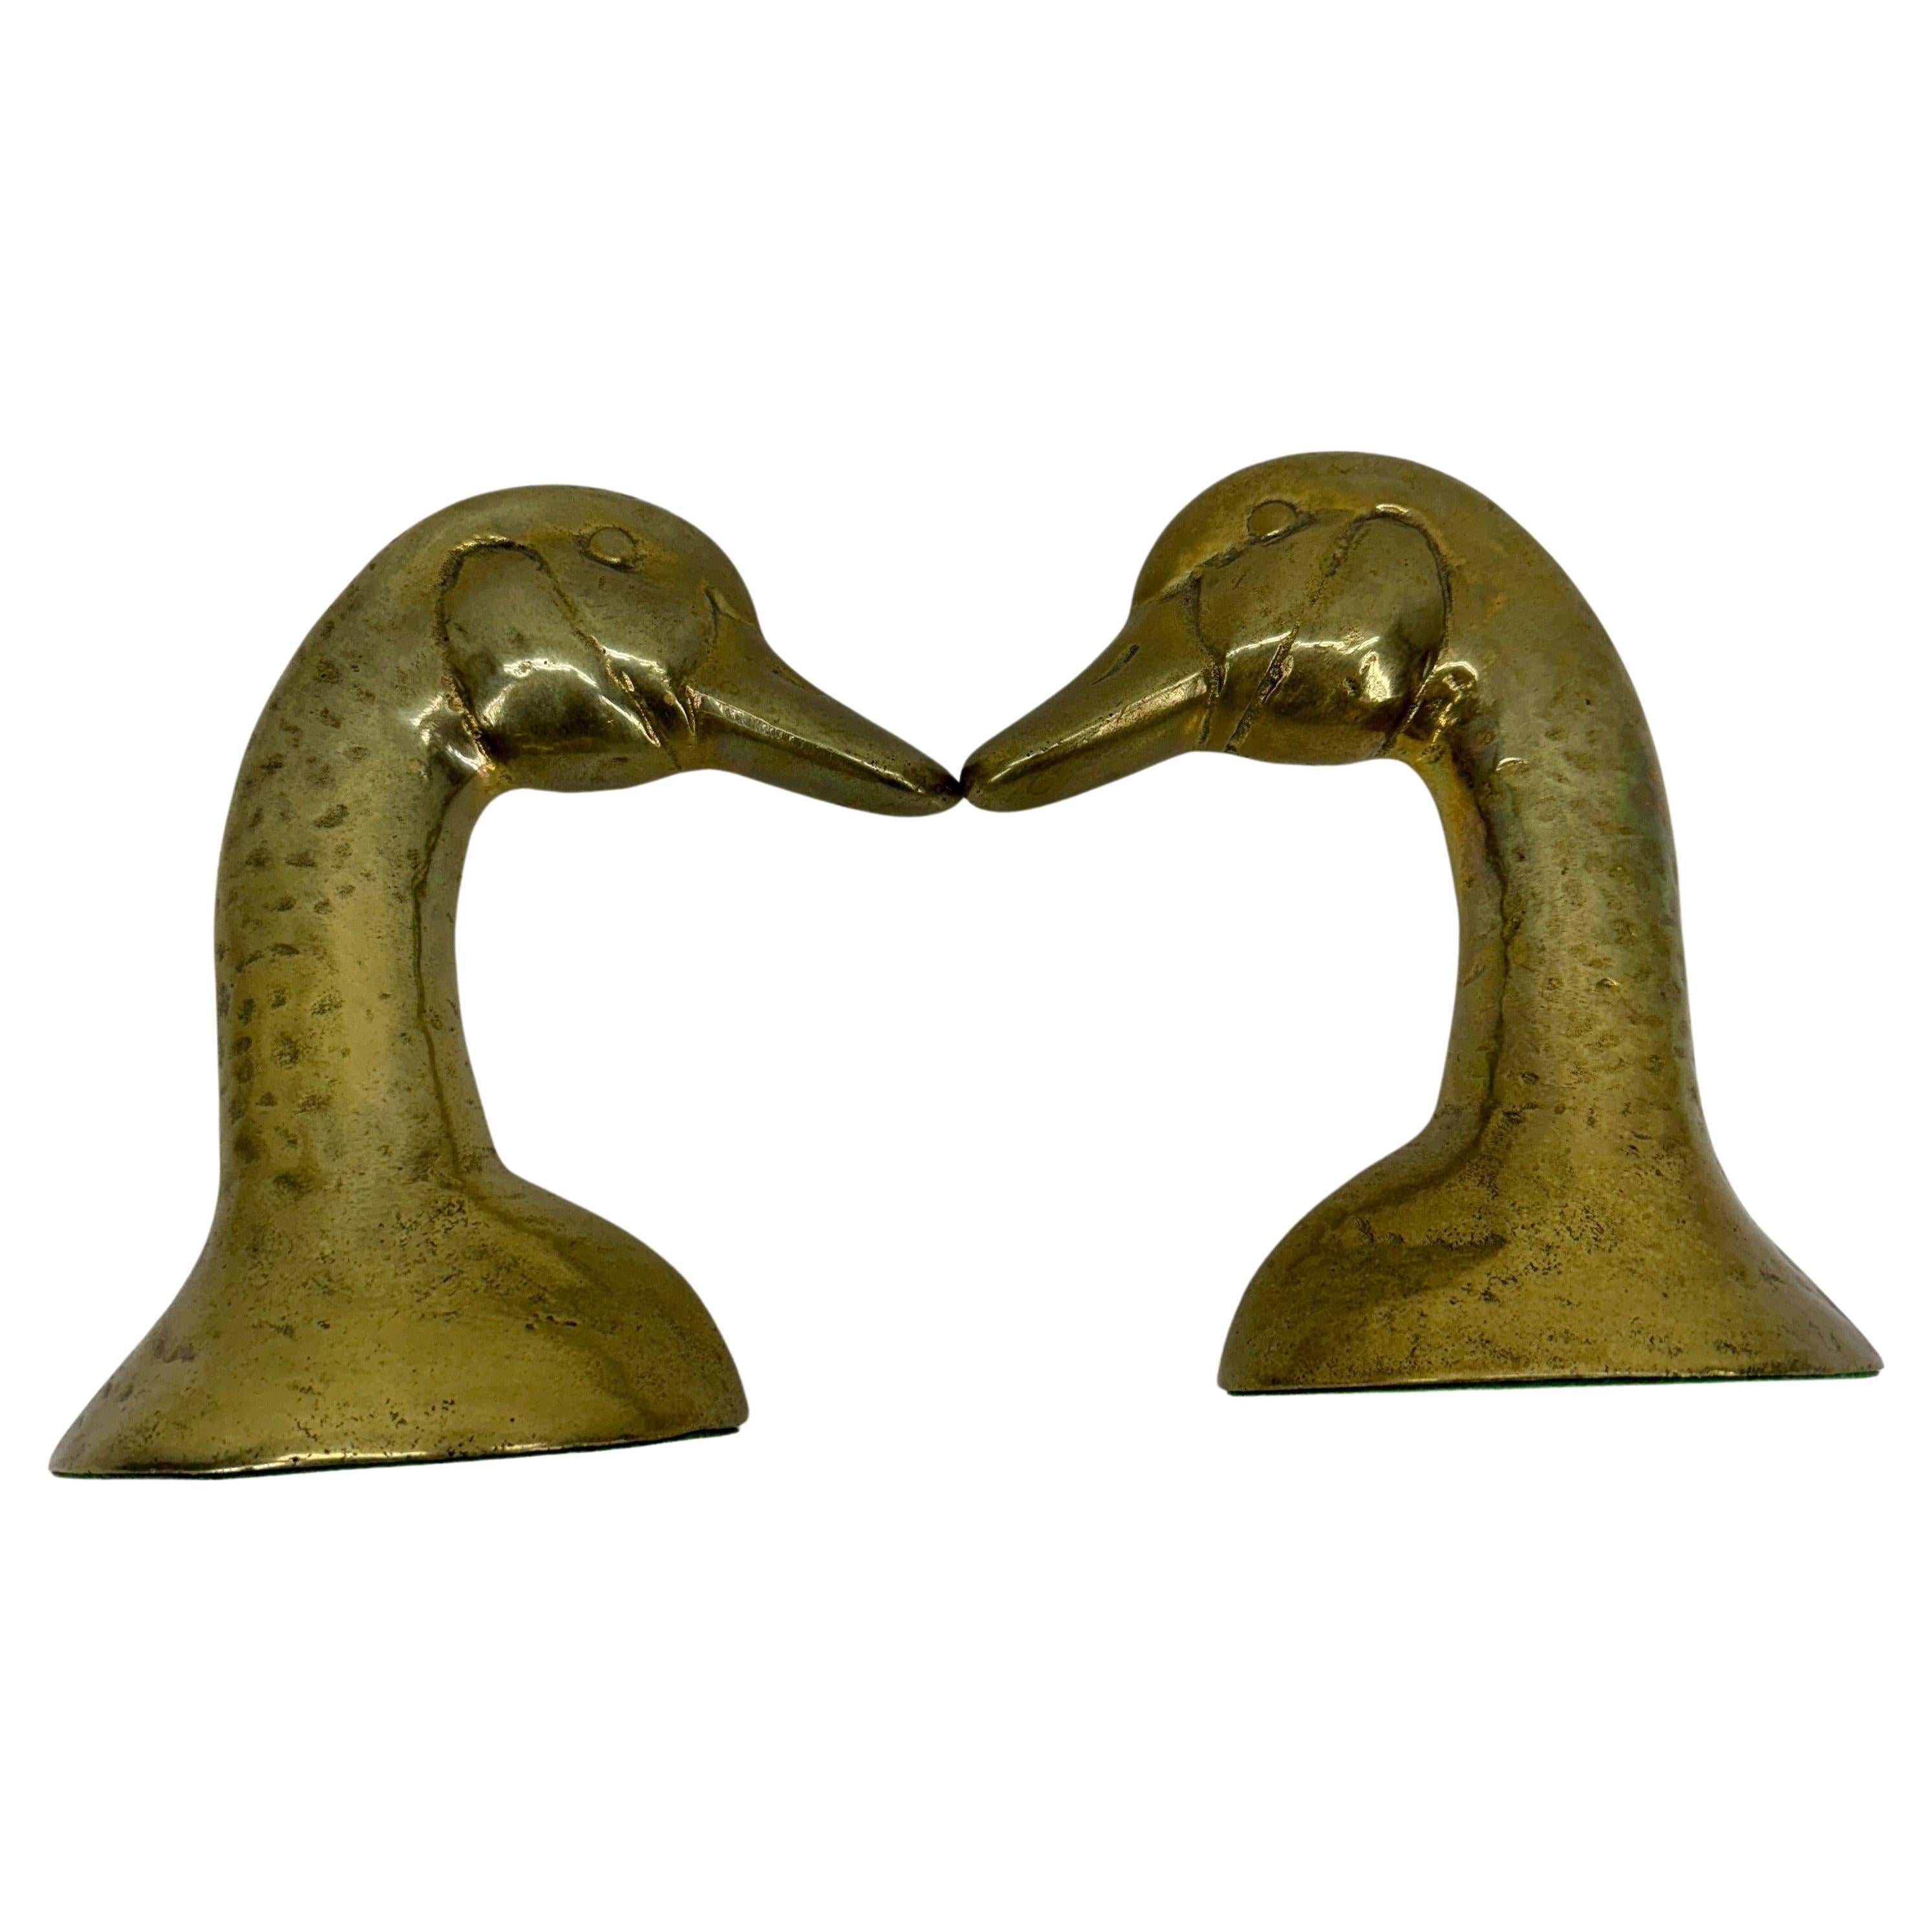 Pair of Mid-Century Modern Brass Duck Bookends In Good Condition For Sale In Haddonfield, NJ